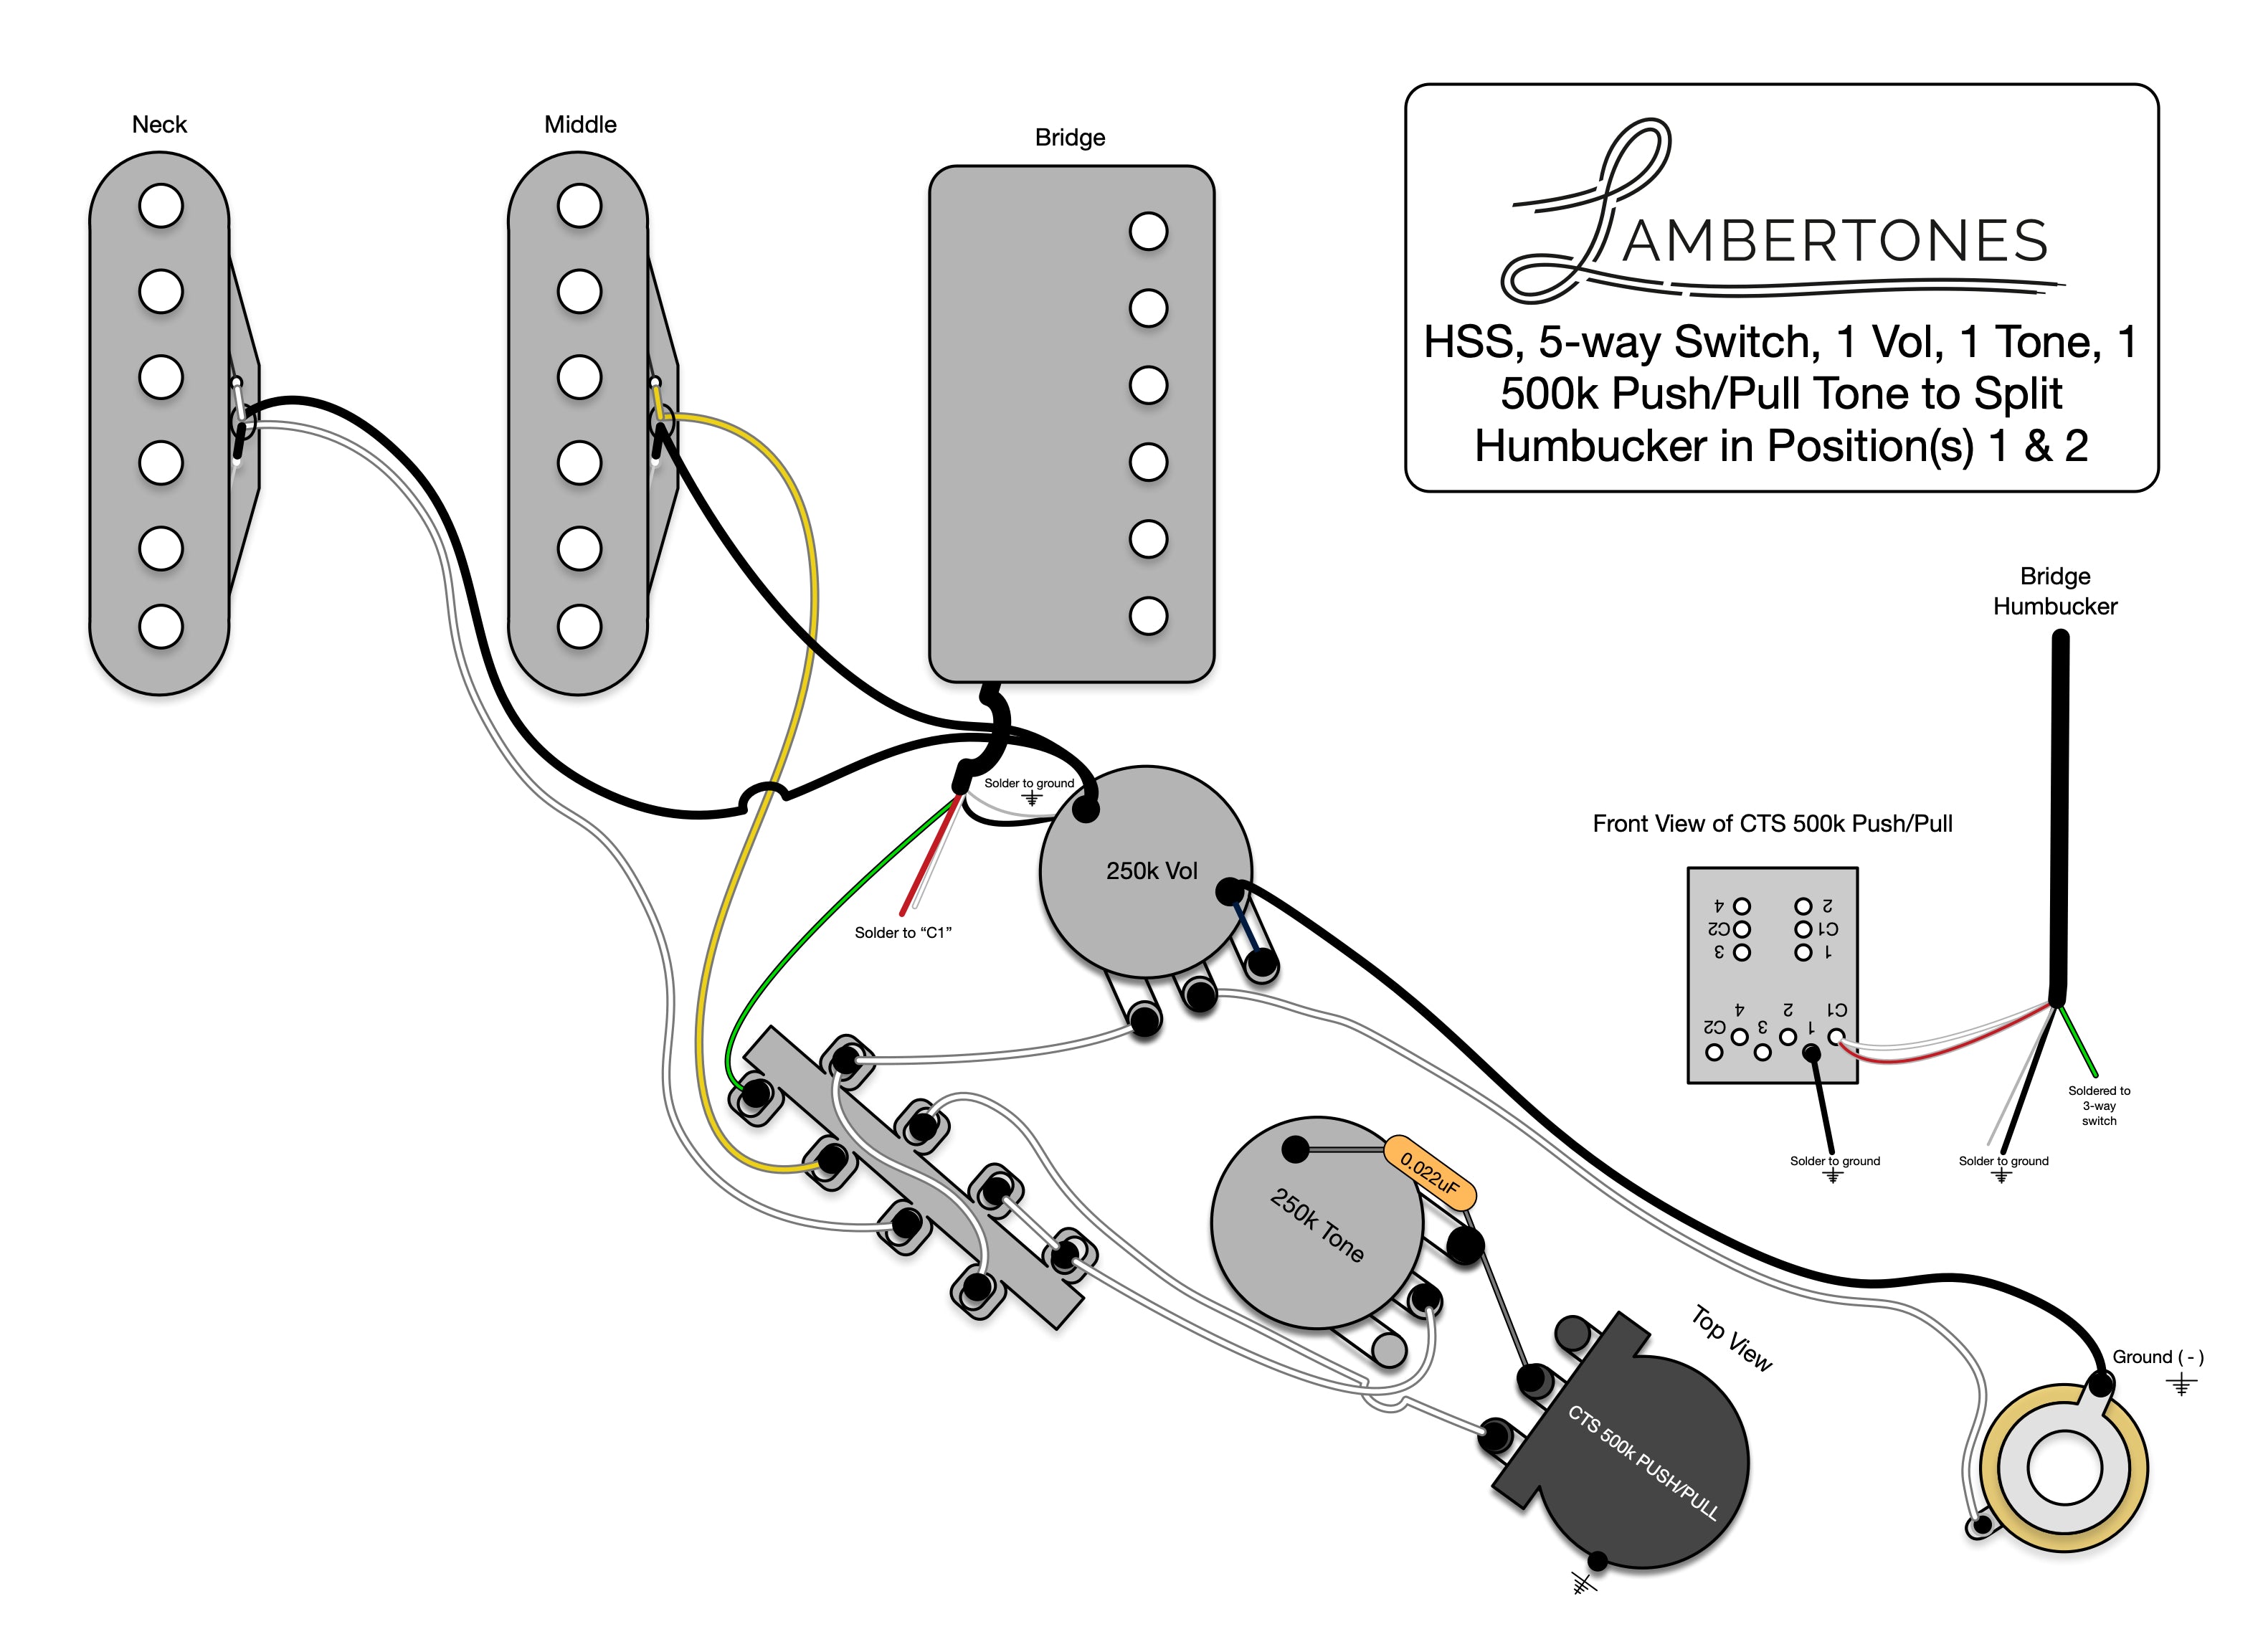 Humbucker Single Conductor Wire Wiring Diagram from cdn.shopify.com